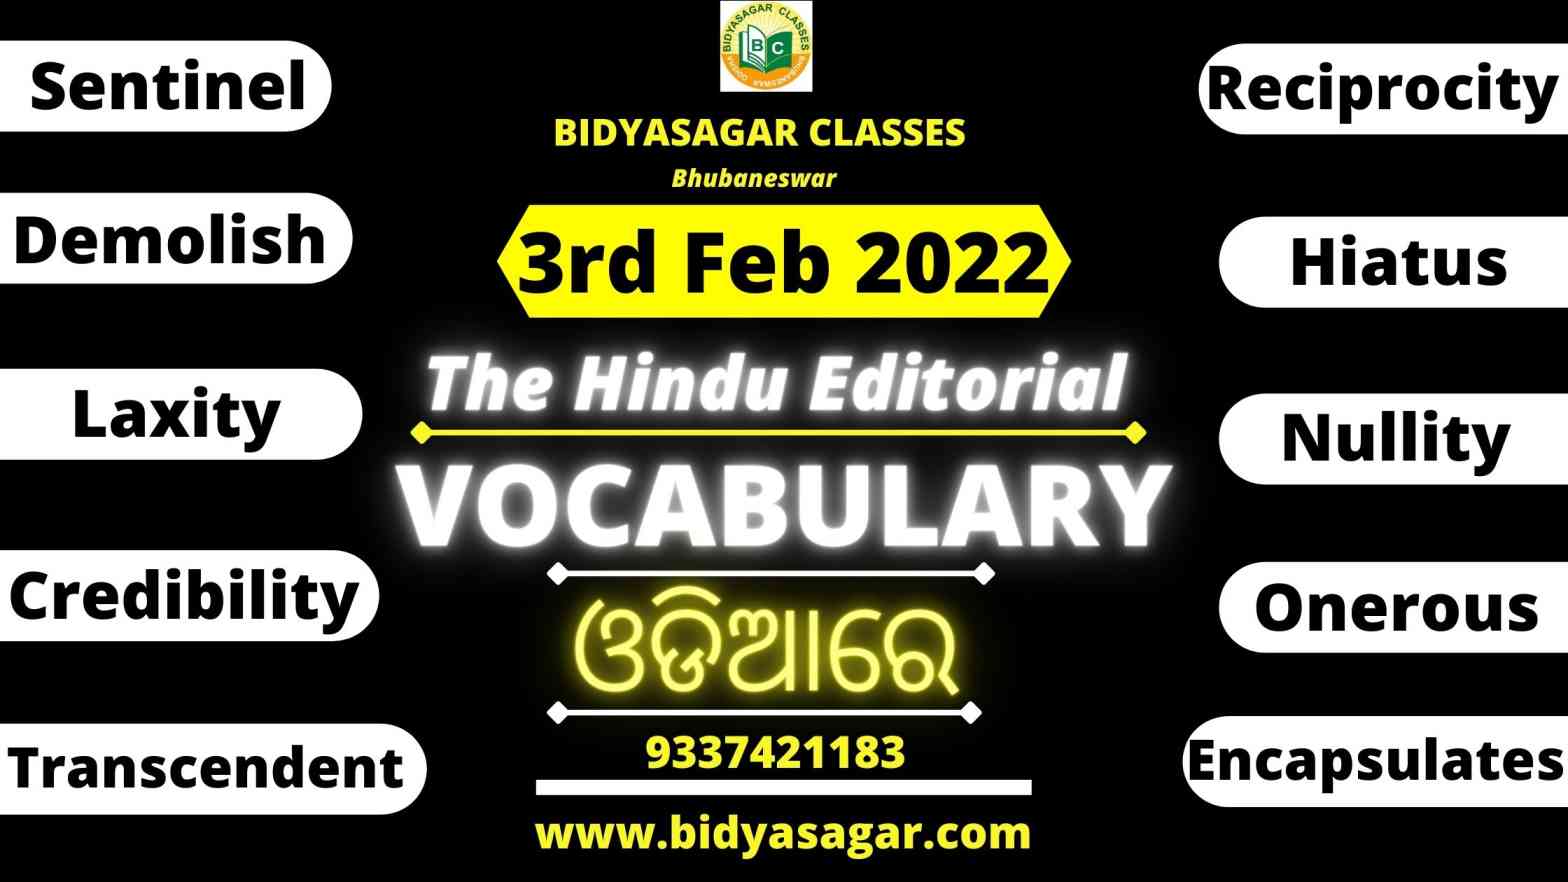 The Hindu Editorial Vocabulary of 3rd february 2022